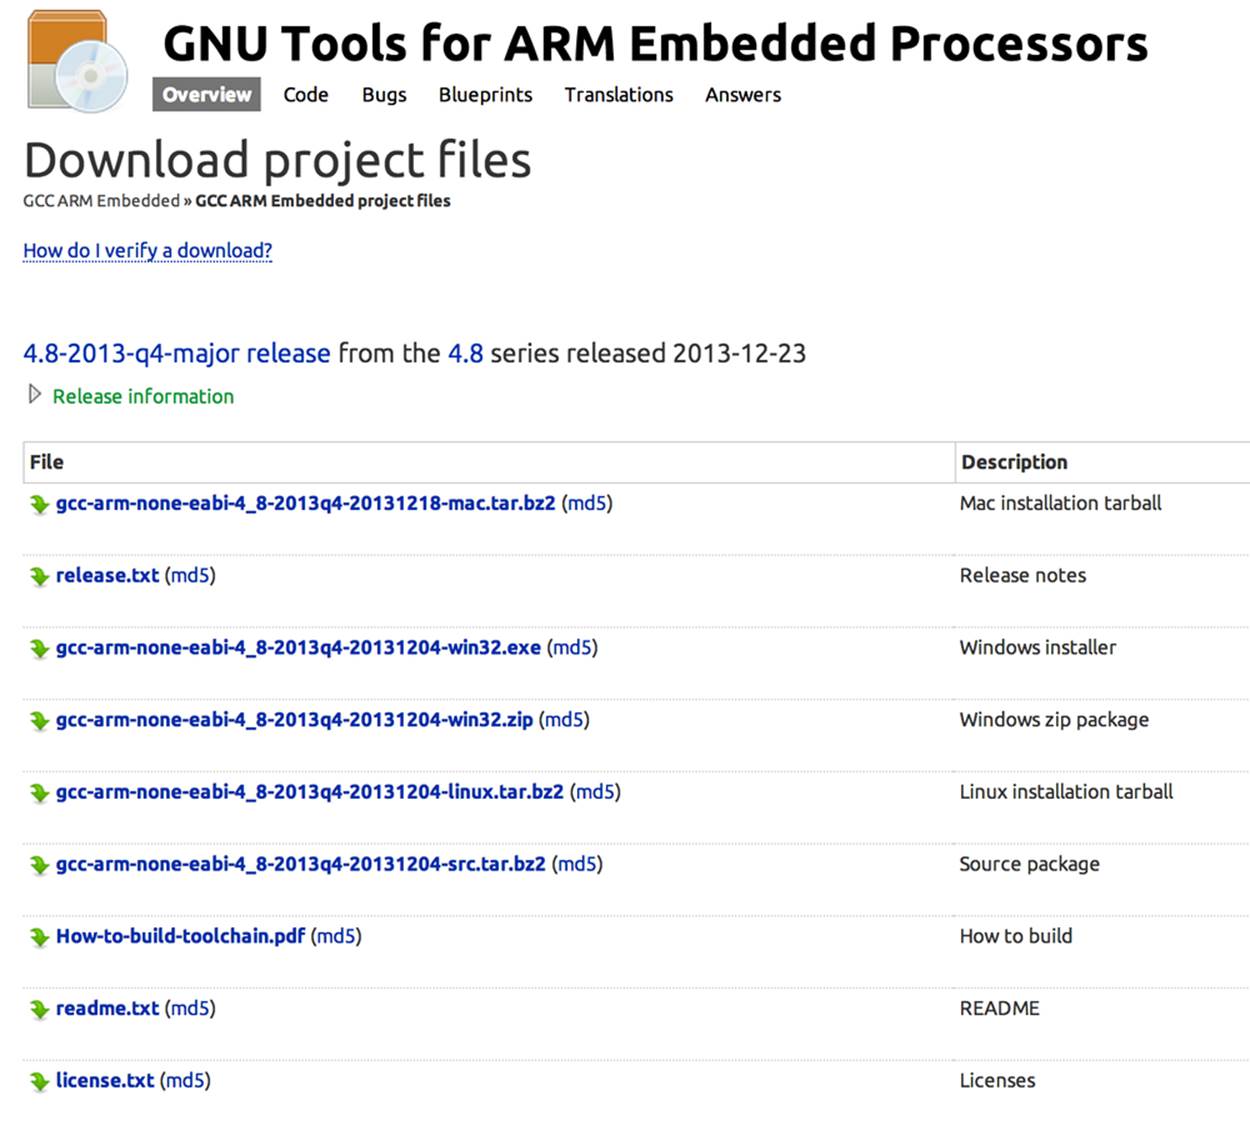 Download options for GNU Tools for ARM Embedded Processors